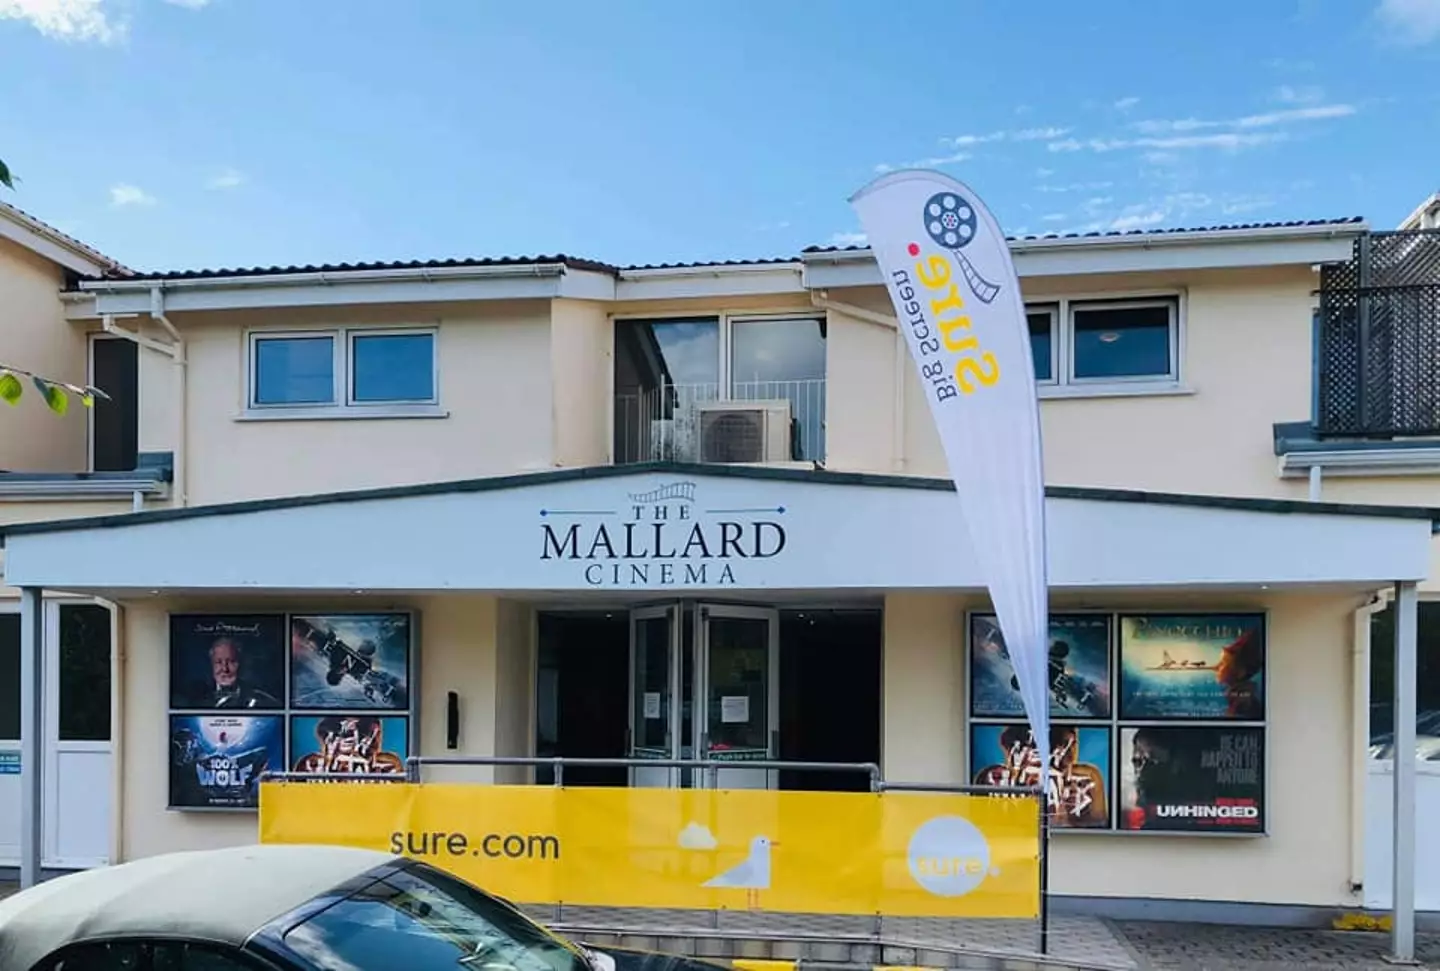 The Mallard Cinema in Guernsey has now started showing the film again.